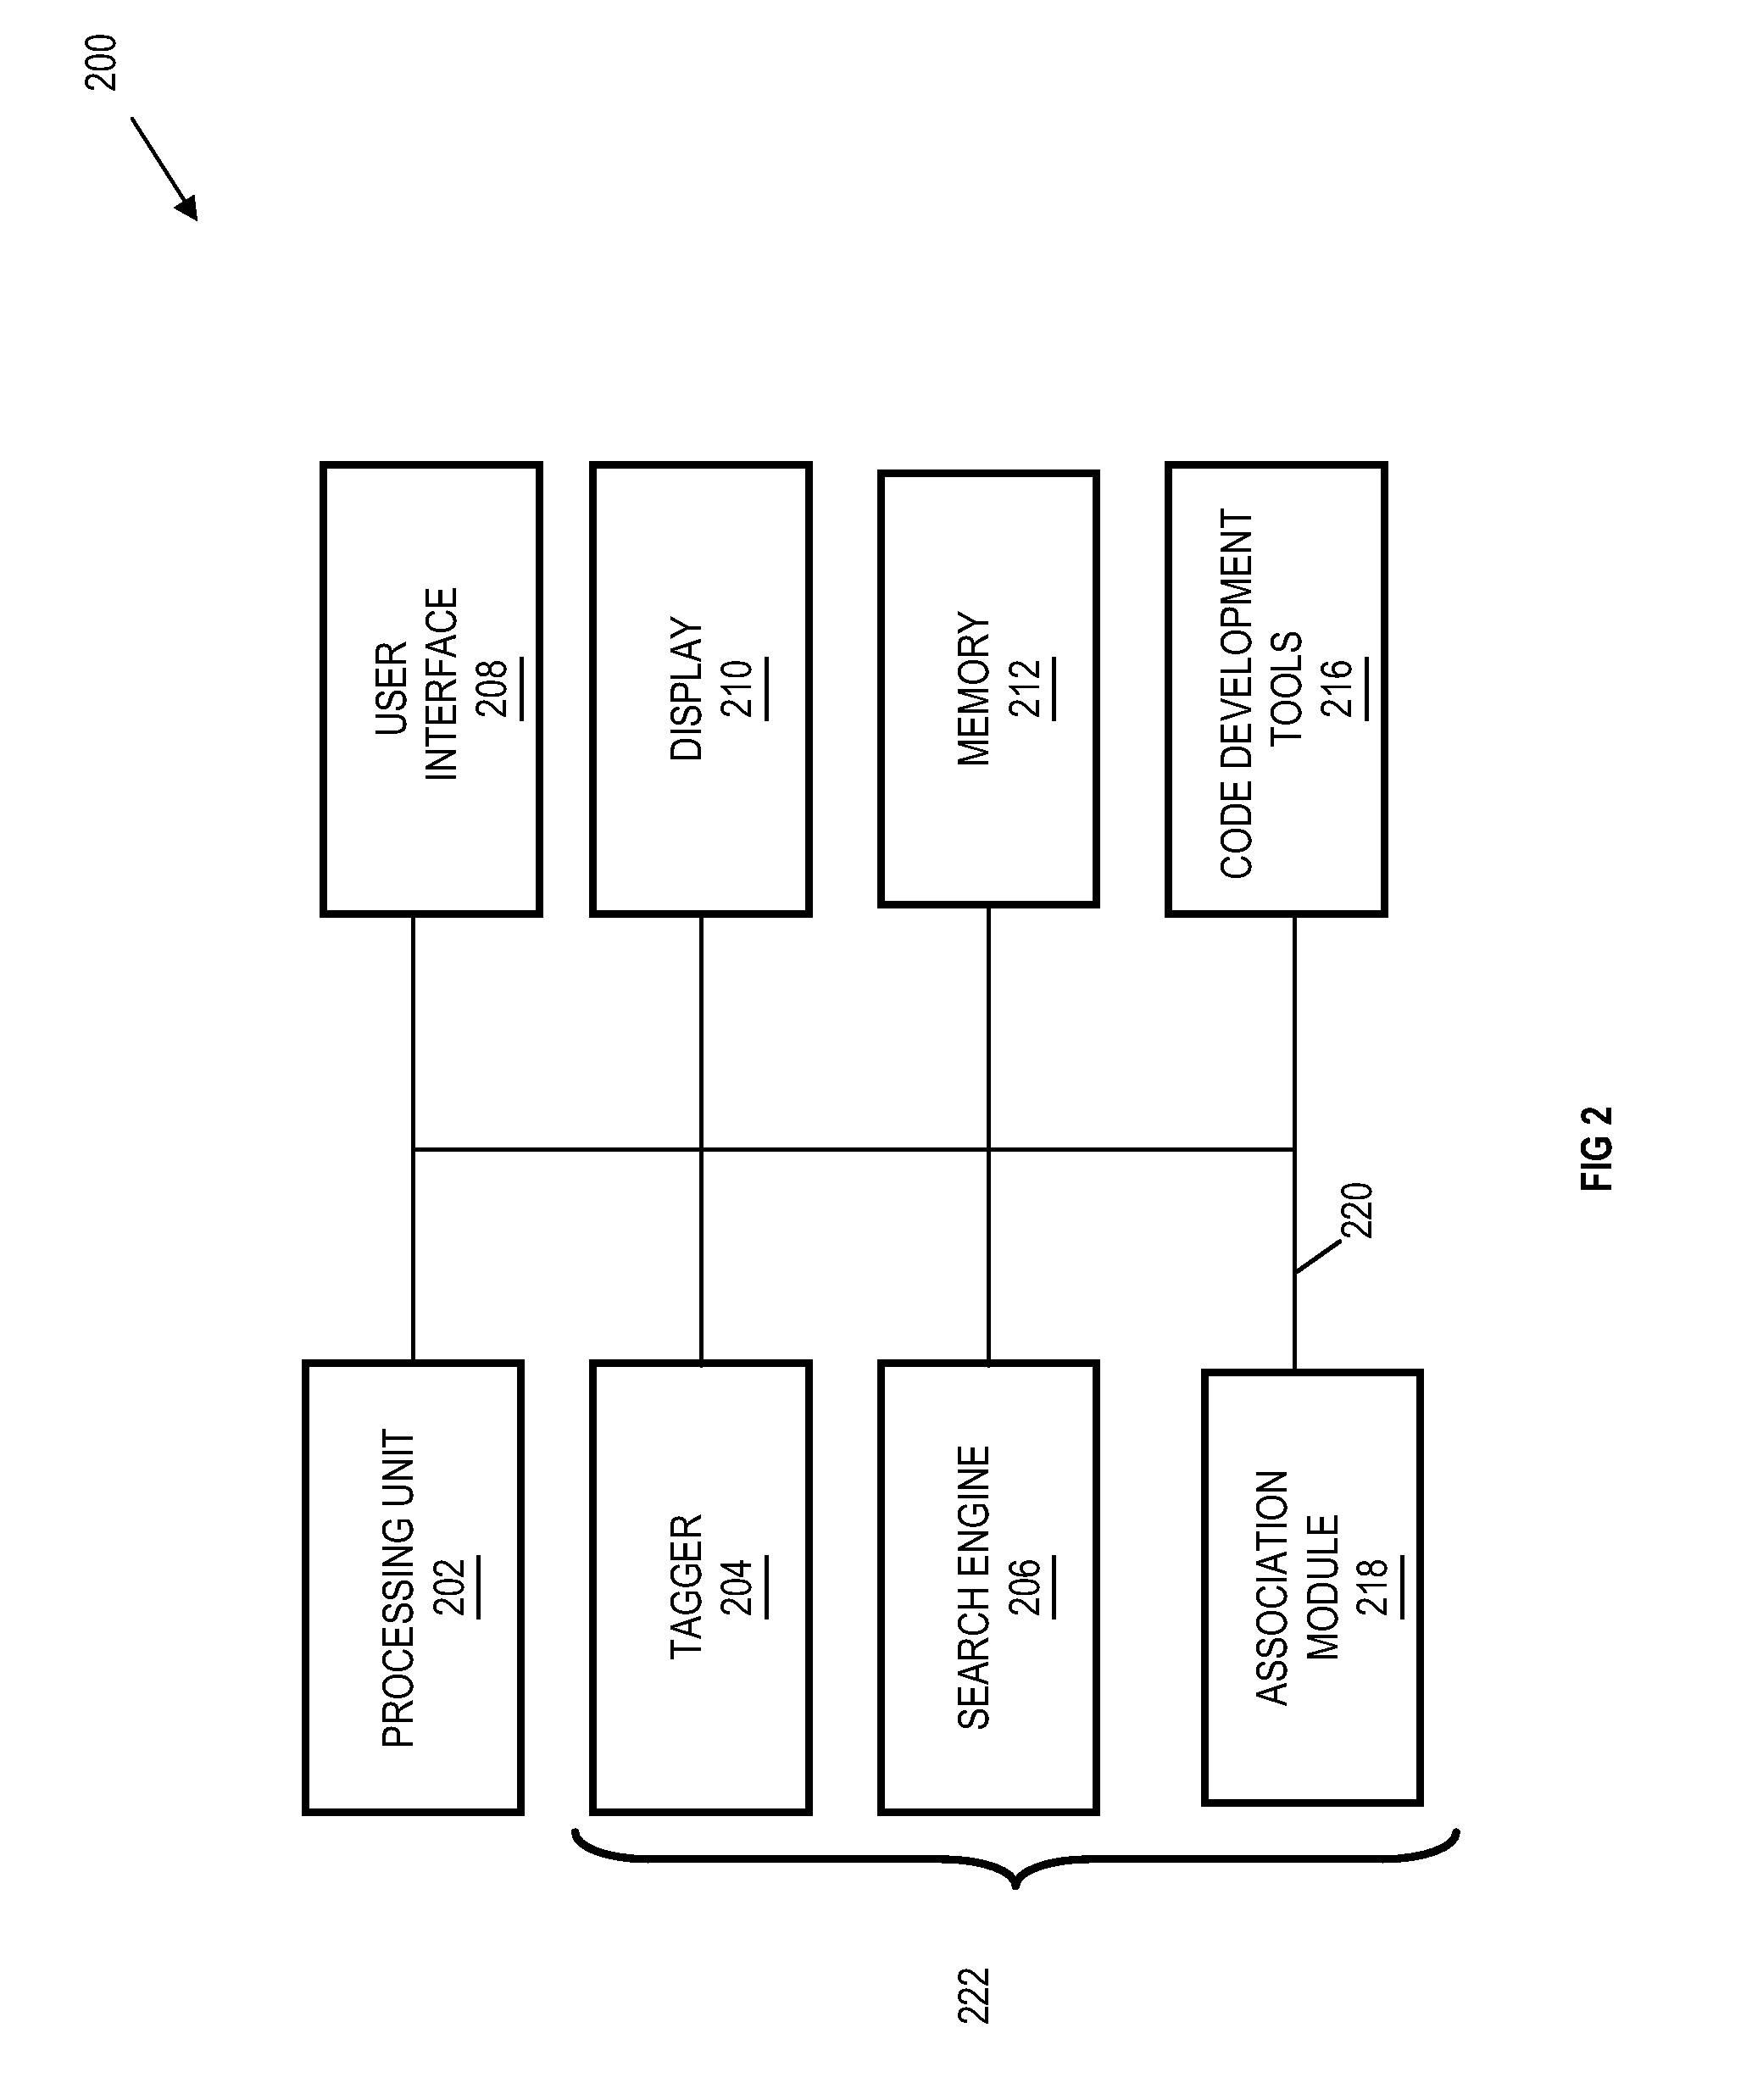 Systems and methods for managing data associated with computer code